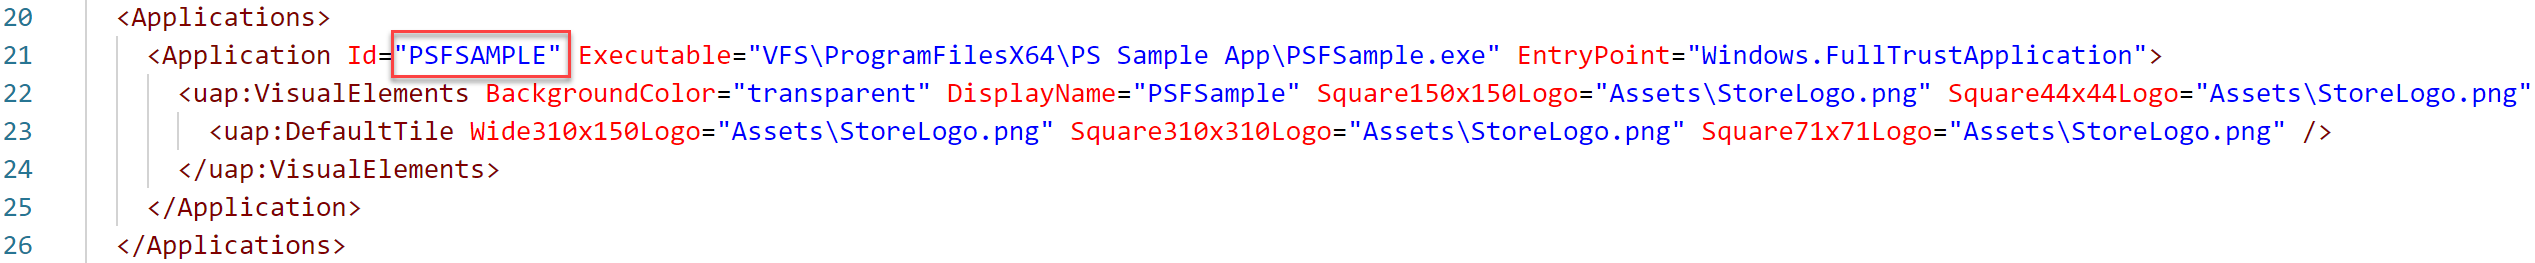 Image showing the location of the ID within the AppxManifest file.